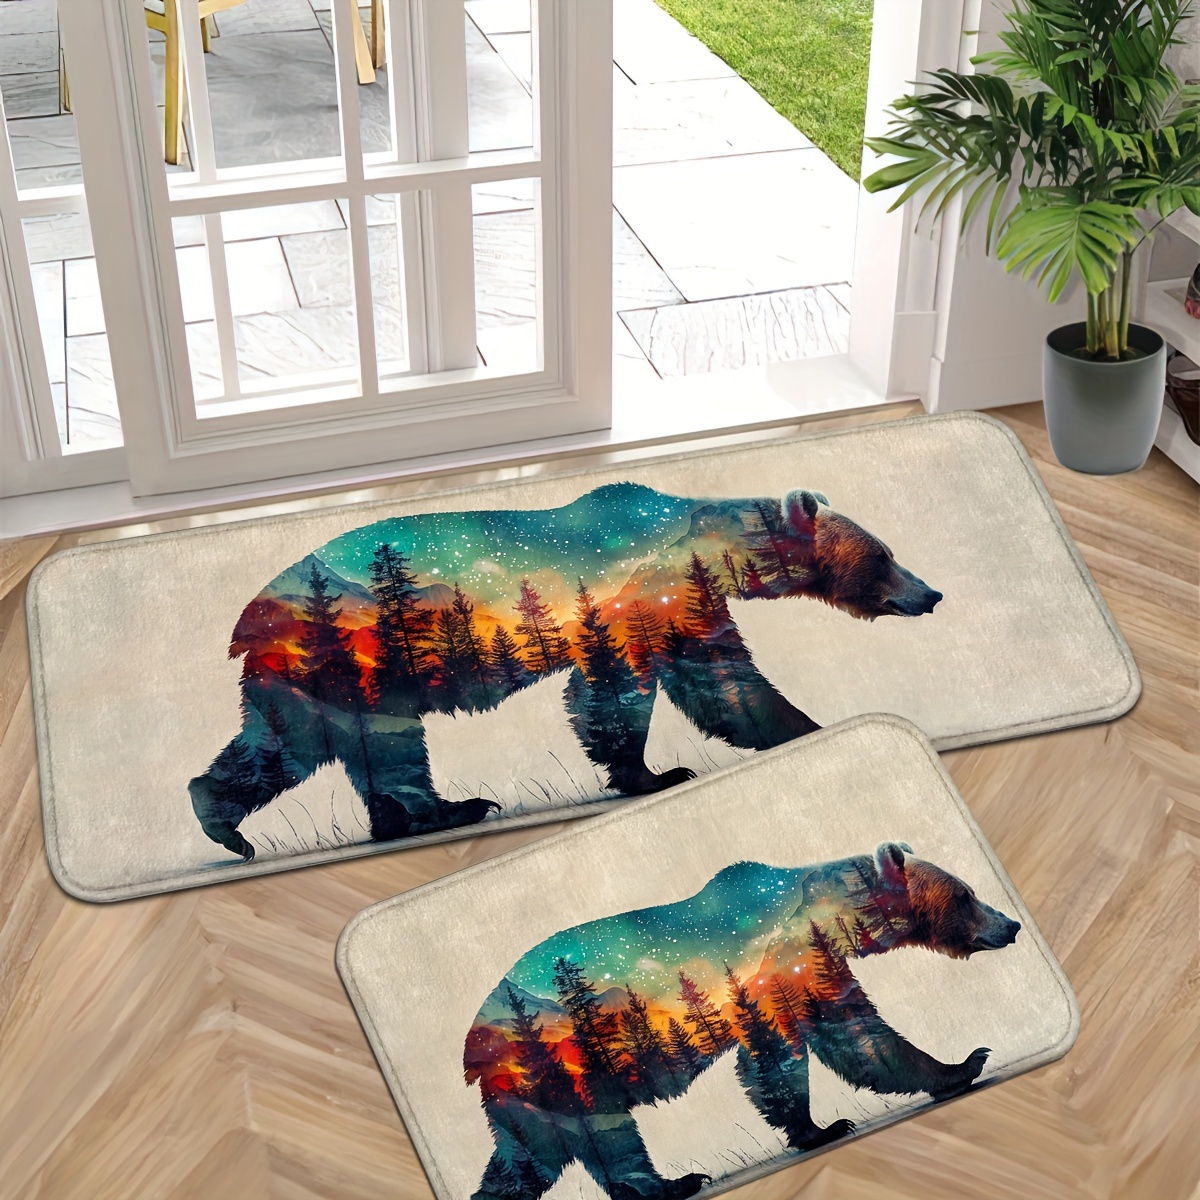 

Starry Sky Forest Bear Door Mat - Non-slip, Machine Washable, Polyester Indoor Entrance Rug For Entryway, Kitchen, Bathroom, Laundry Room - Thicken Carpet Runner Mats